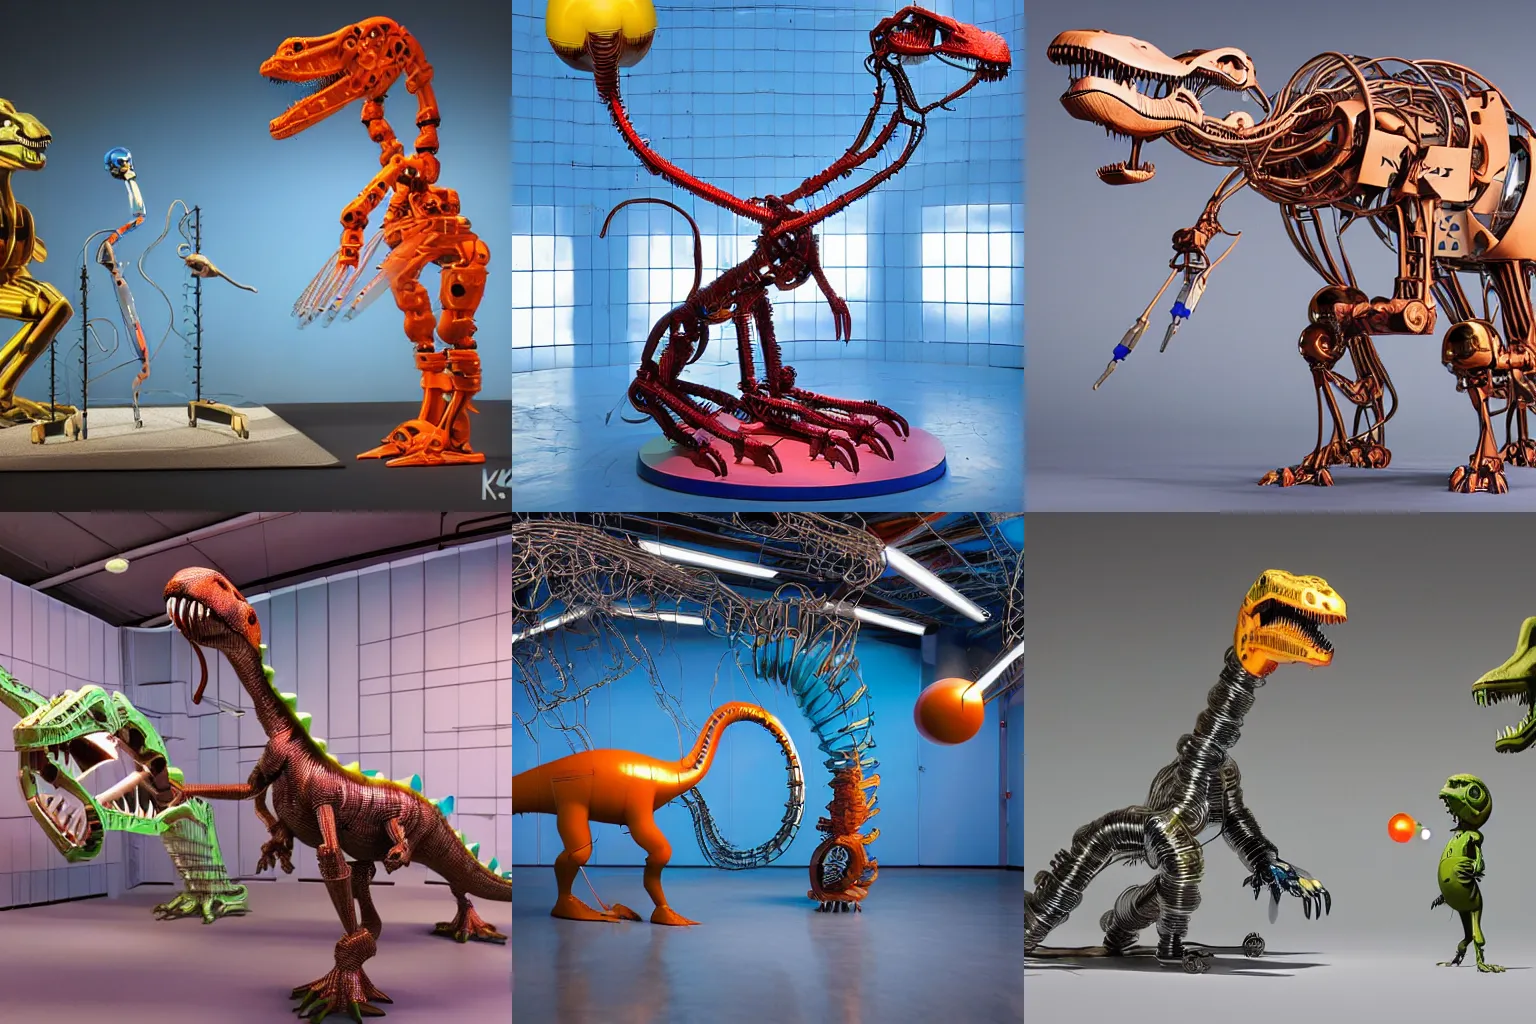 Prompt: A propaganda, plastic simple funny mechanic organic mechabot dinosaur characterdesign toy sculpture made from chrome wires and tubes by moebius, by david lachapelle, by angus mckie, by rhads, by jeff koons, in an empty studio hollow, c4d